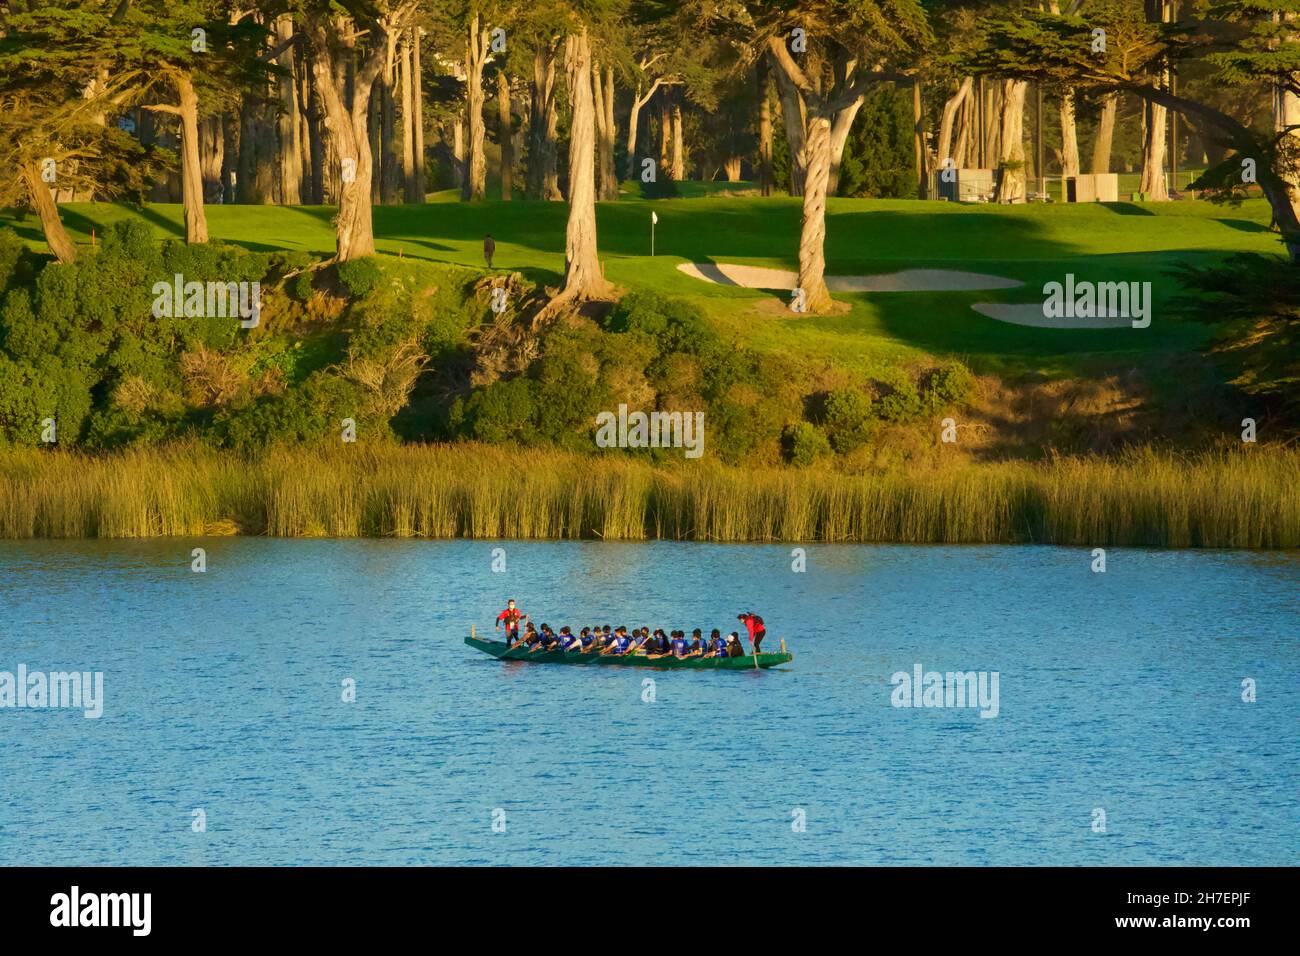 Dragon boat race boat on Lake Merced. Dragon boat differs from crew or oarlocked team racing boats as rowers paddle. San Francisco, California, USA. Stock Photo